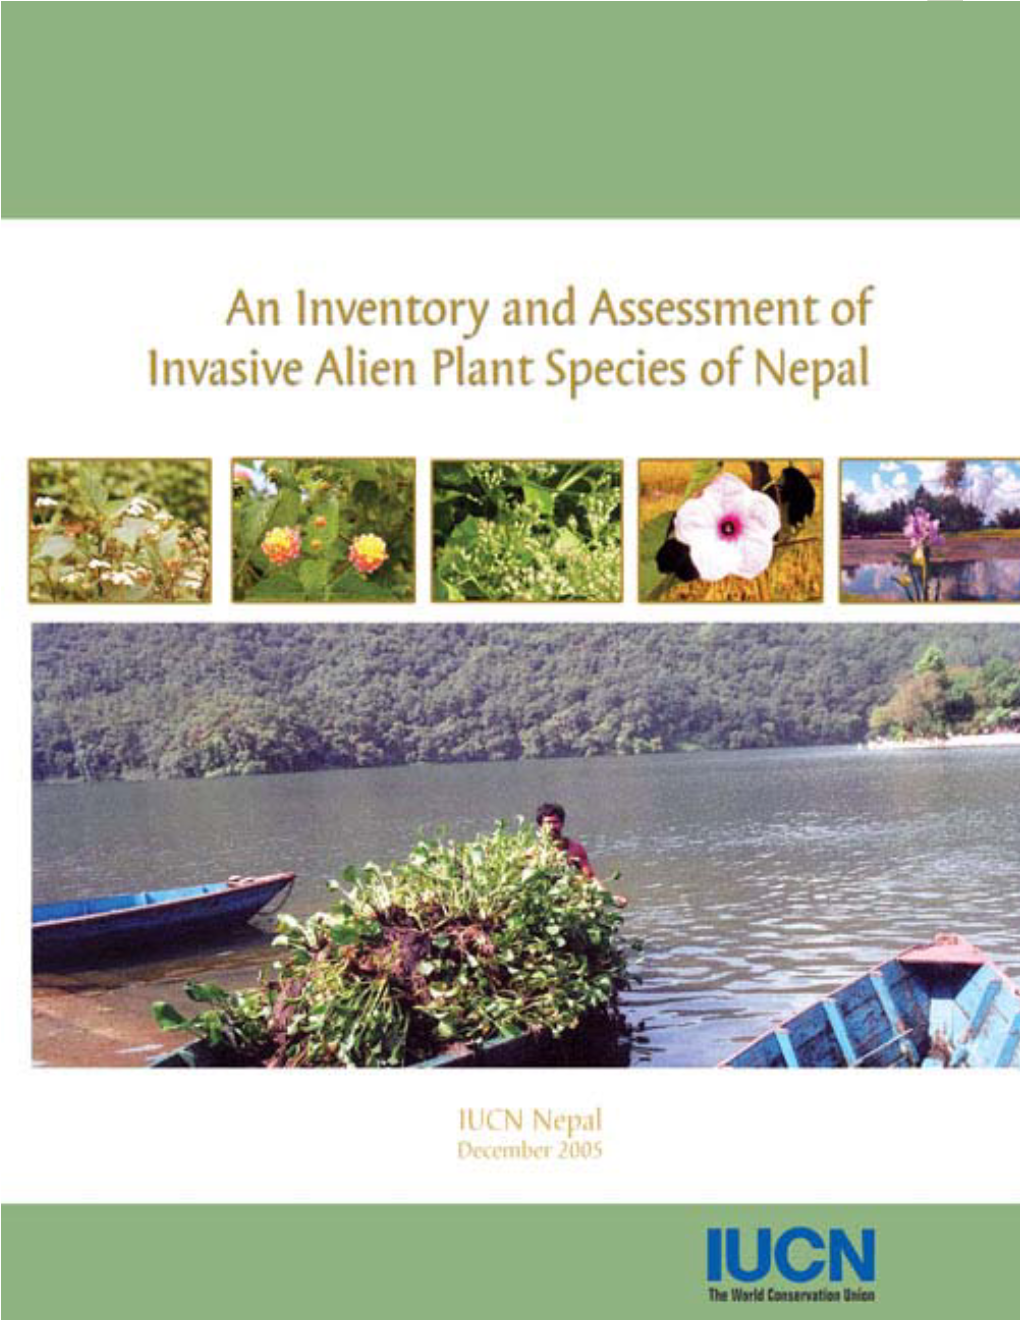 (2005). an Inventory and Assessment of Invasive Alien Plant Species of Nepal, IUCN - the World Conservation Union, Nepal